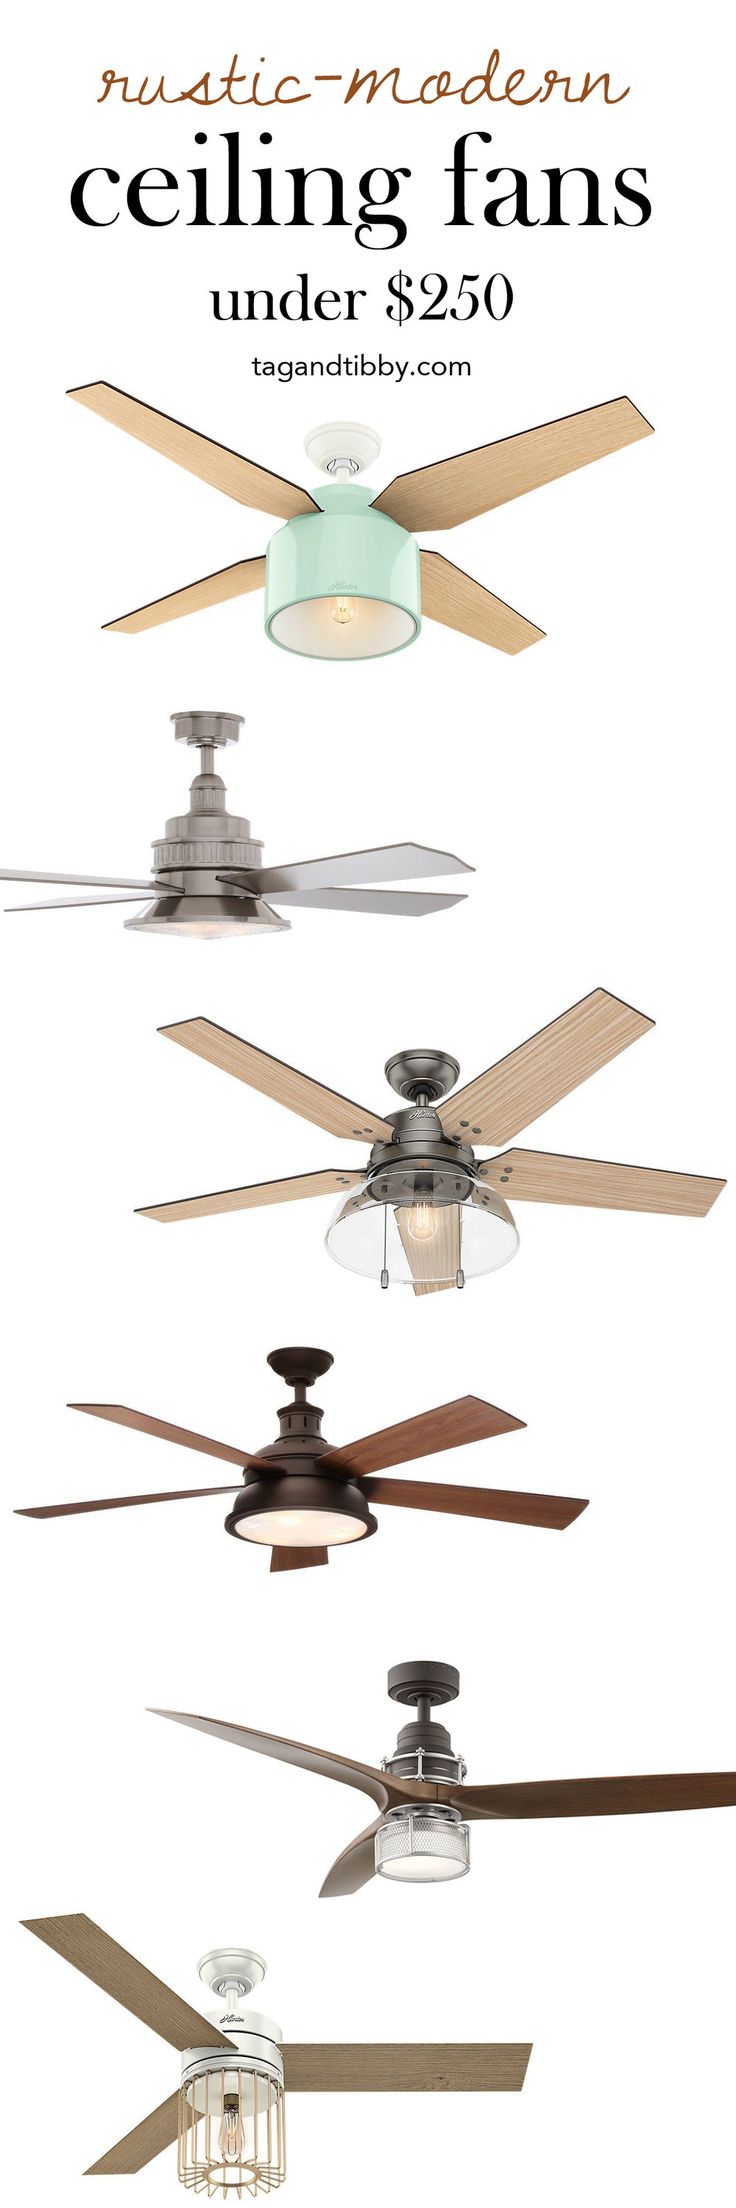 Rustic-Modern ceiling fans for under $250